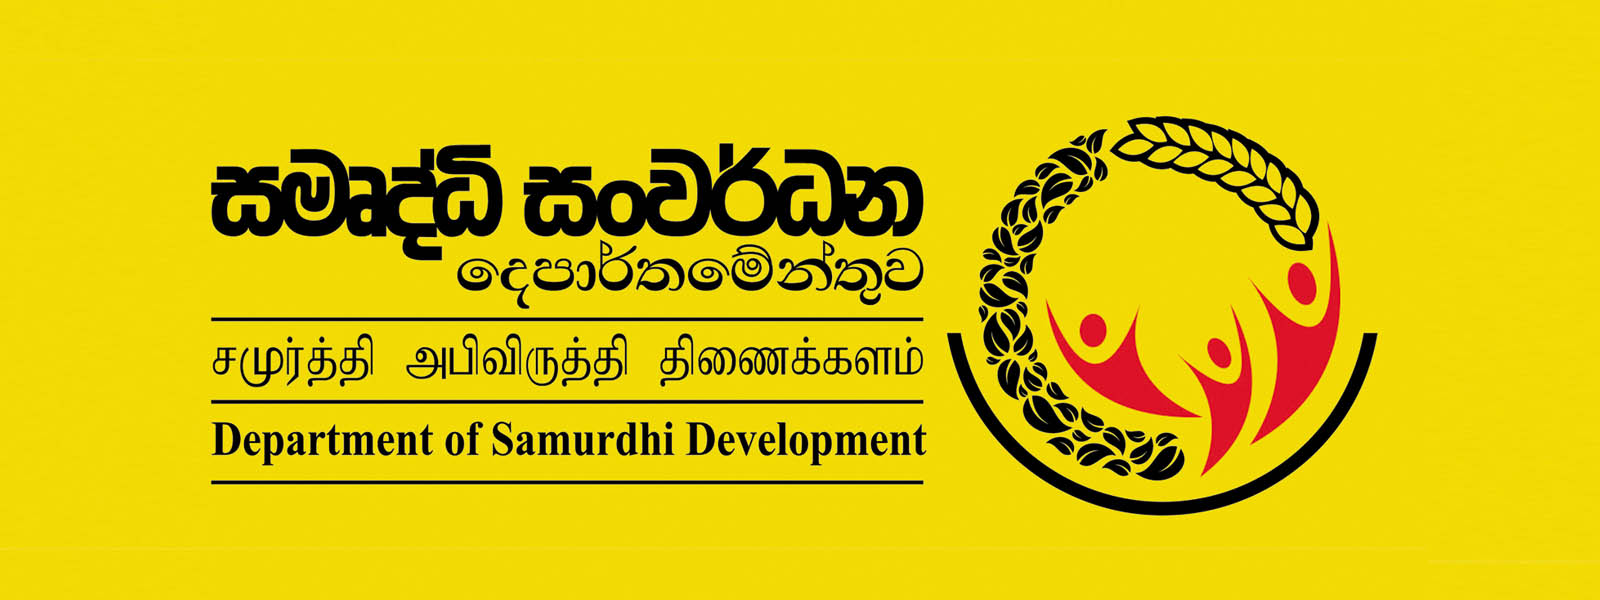 Samurdhi project is marred with irregularities